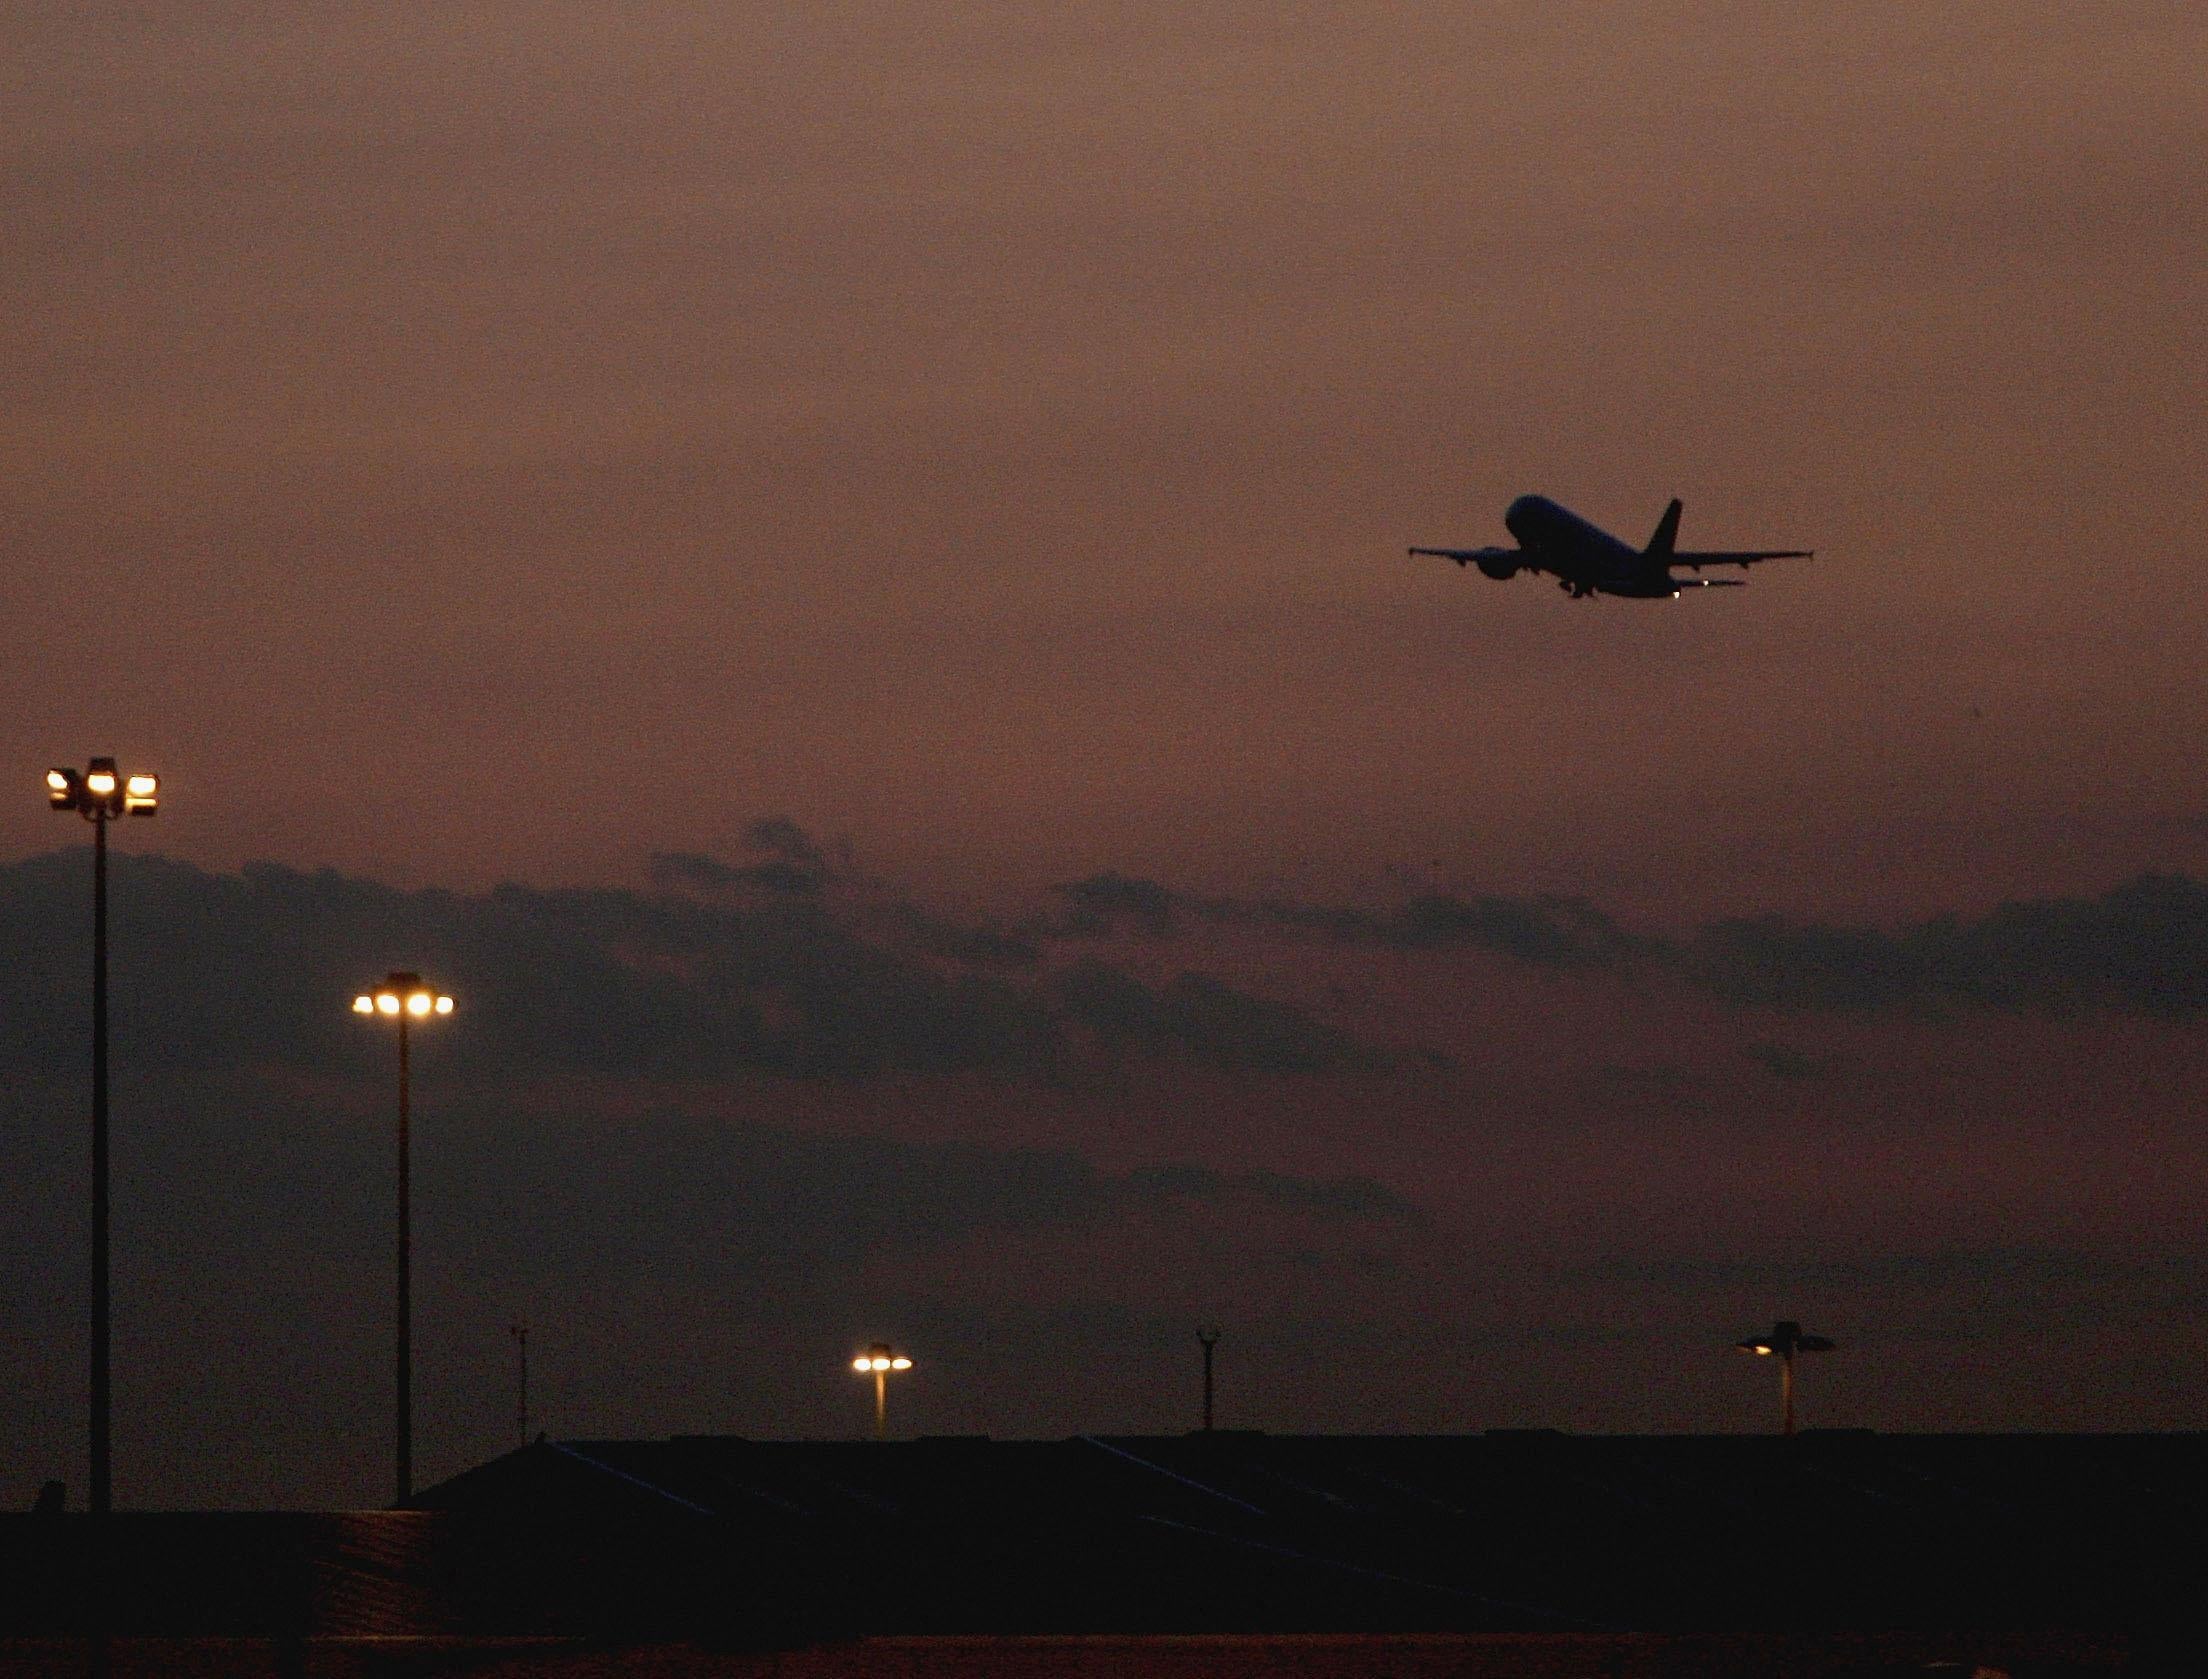 Charter flights leave Stansted airport in the middle of the night or very early in the morning